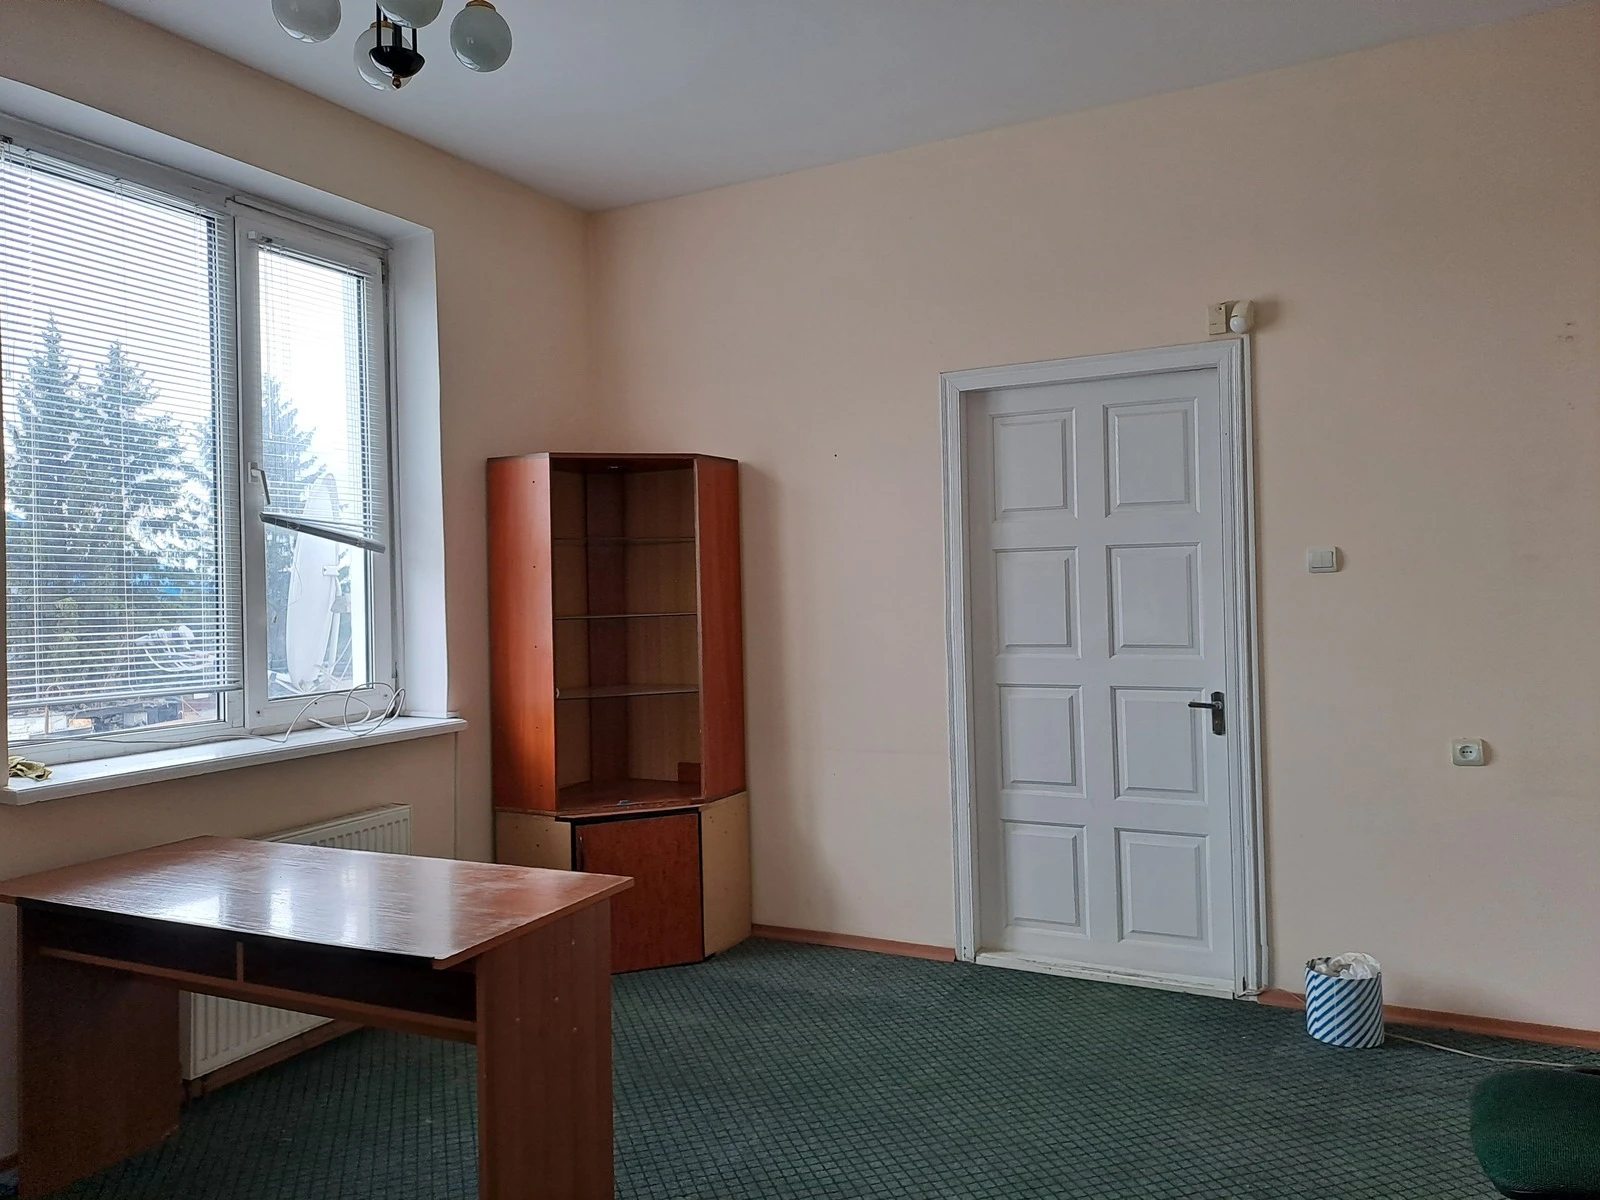 Real estate for sale for commercial purposes. 39 m², 2nd floor/4 floors. Druzhba, Ternopil. 